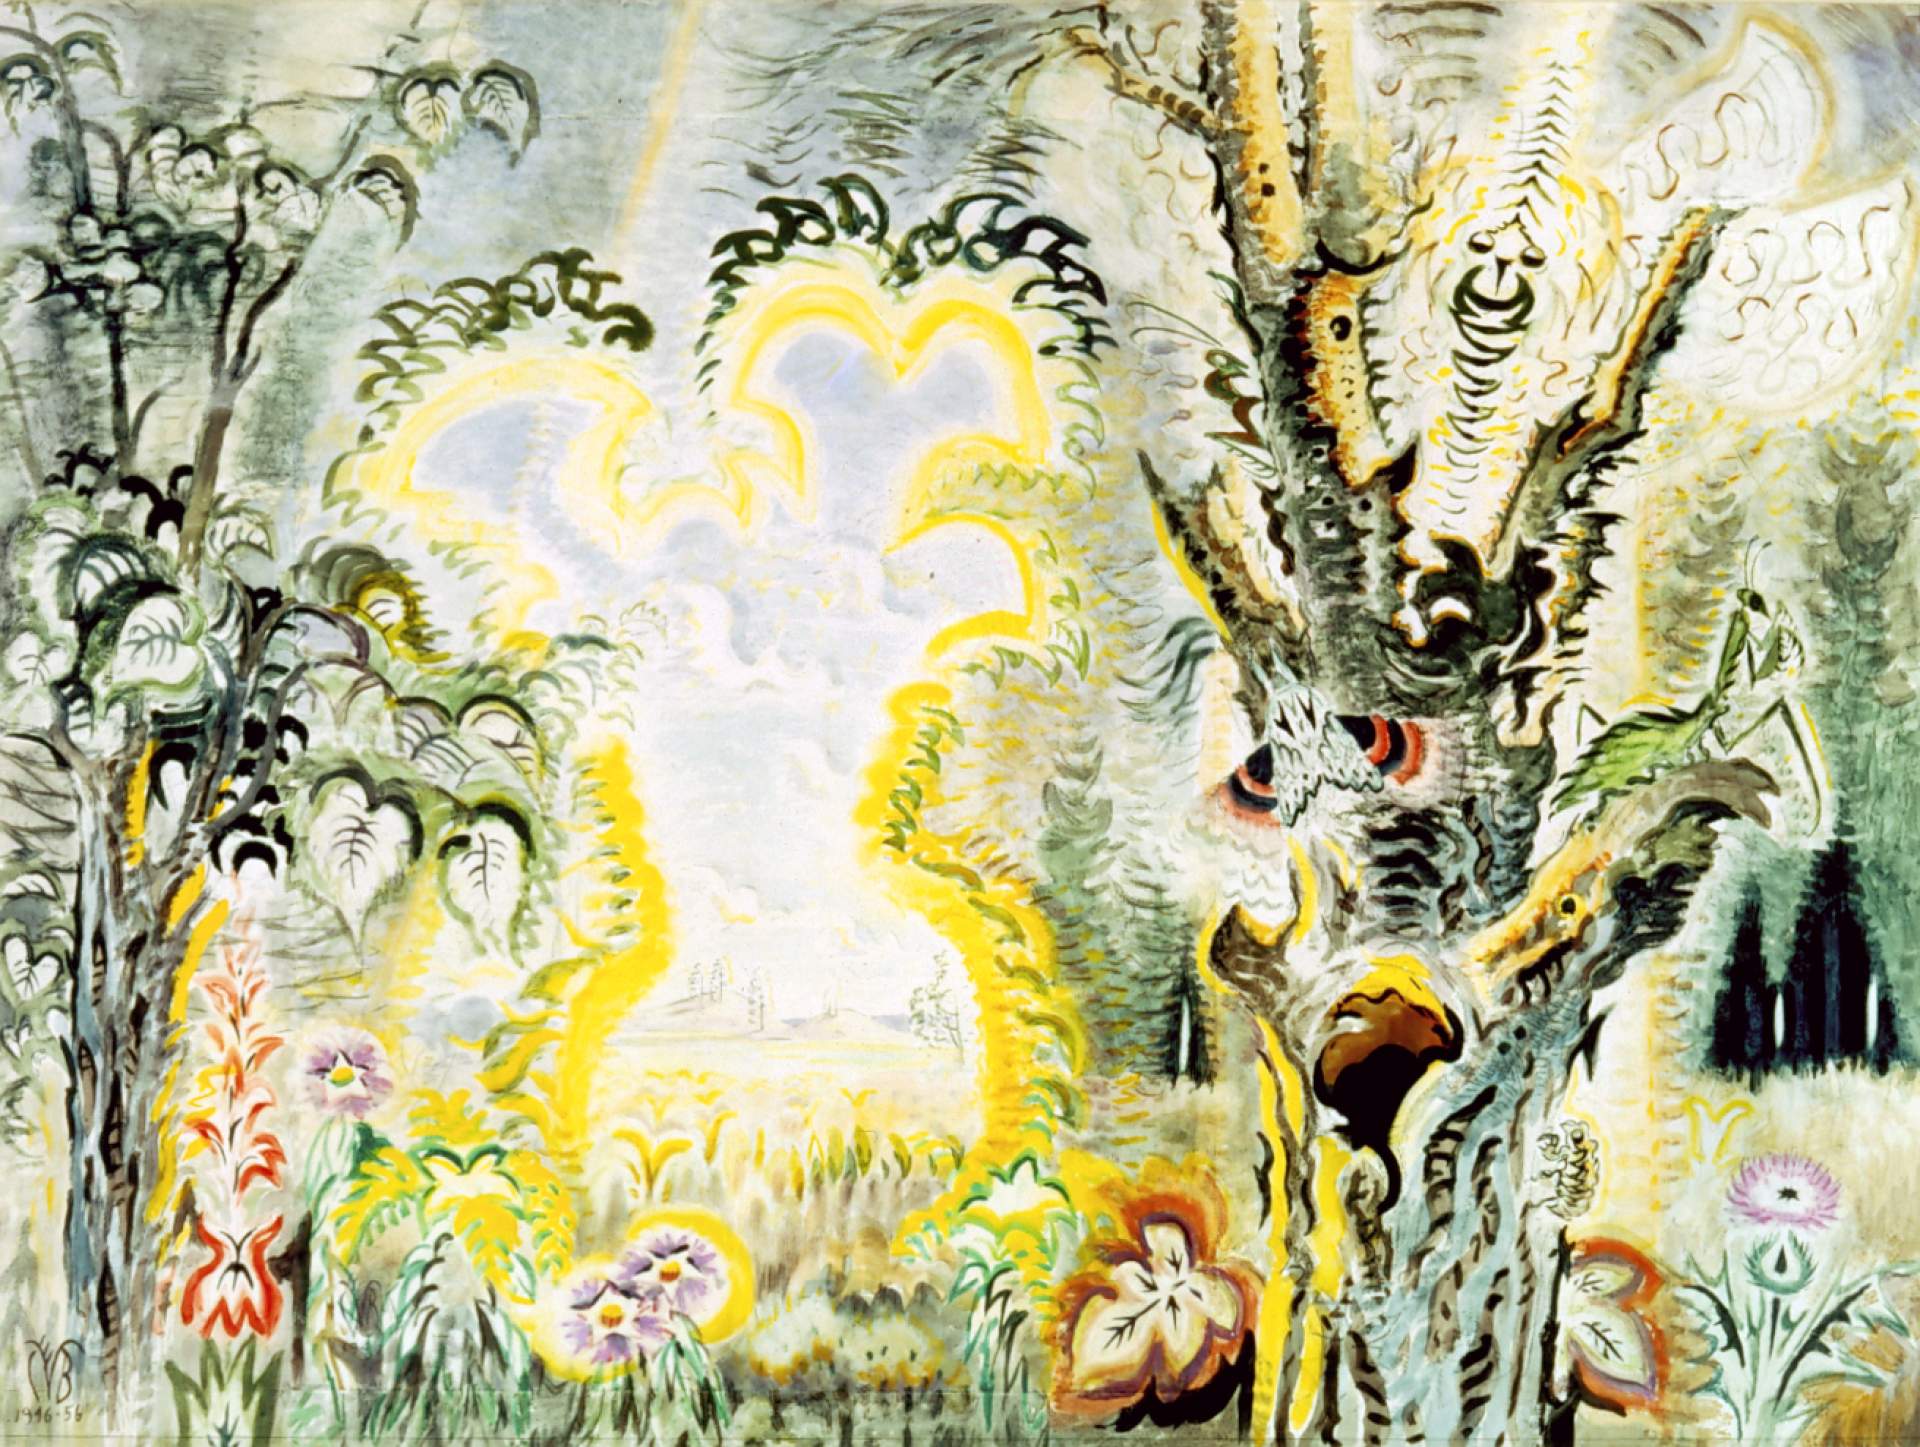 Charles E. Burchfield, Note on an undated drawing